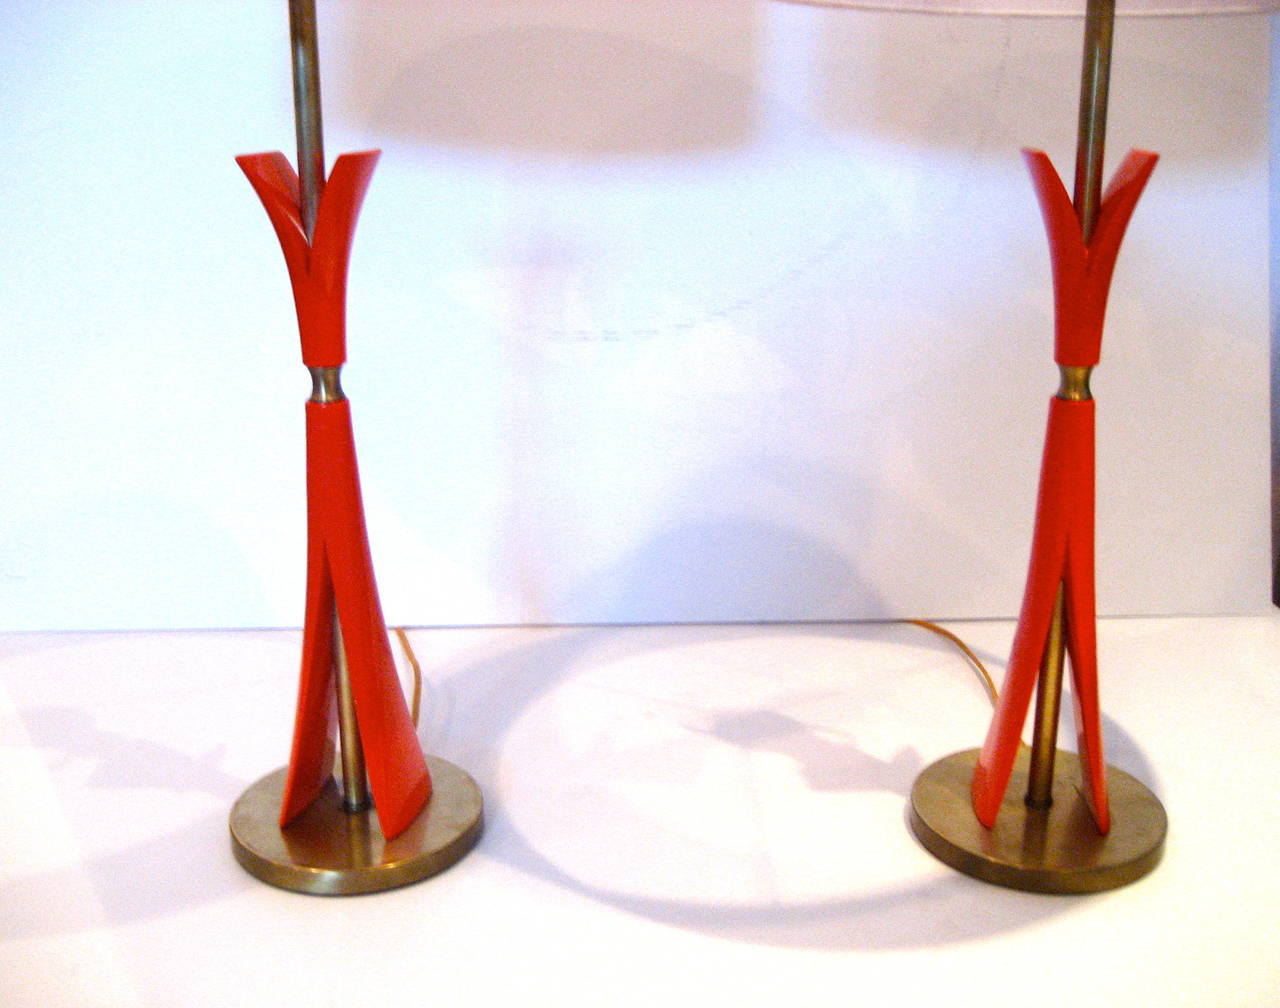 Great set of table lamps circa 1940s, solid metal bases with polished brass accents, these set of lamps have been rewired and restored the orange cast metal has been sandblasted and powder coated the brass fittings have been polished and rewired